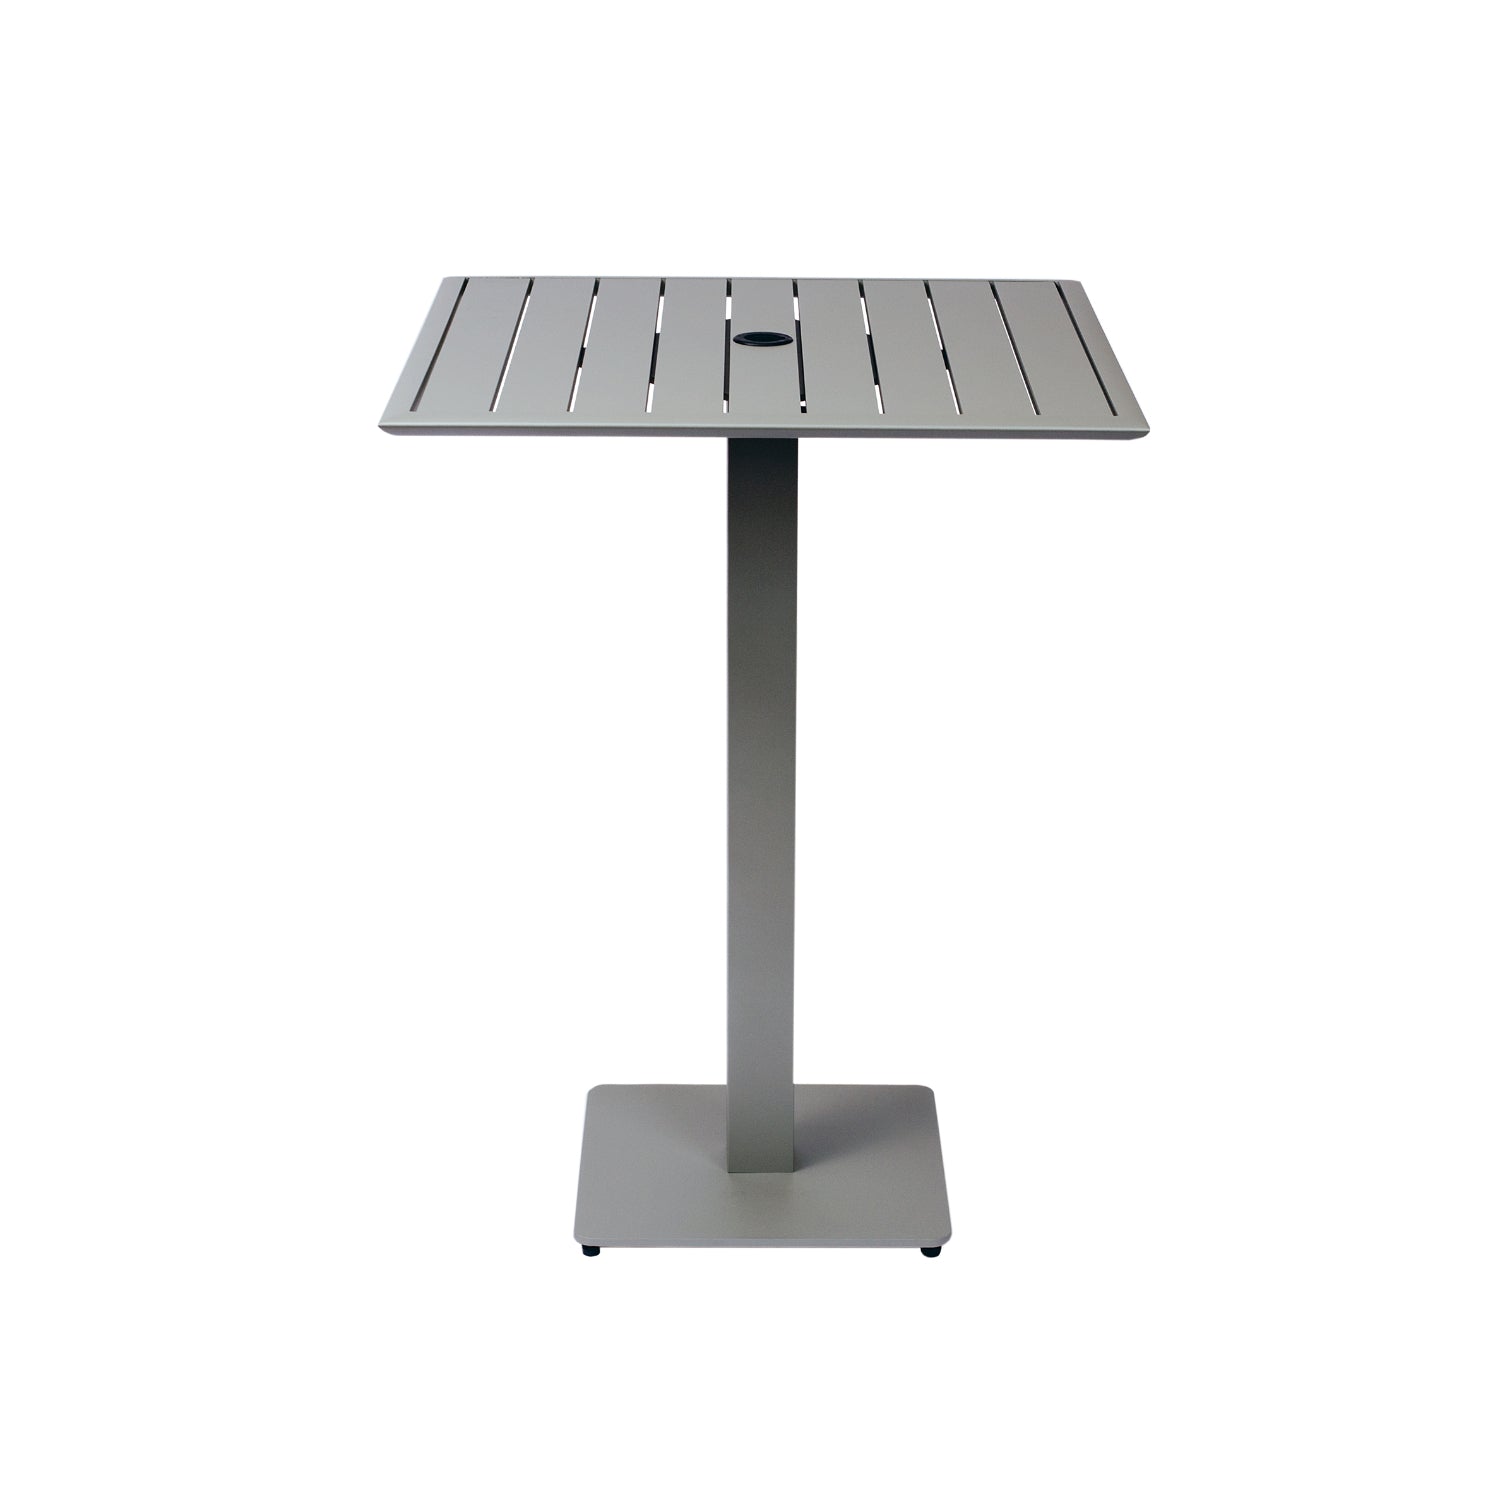 South Beach Collection Outdoor/Indoor 32" Square Titanium Silver Aluminum Bar Height Table with Umbrella Hole